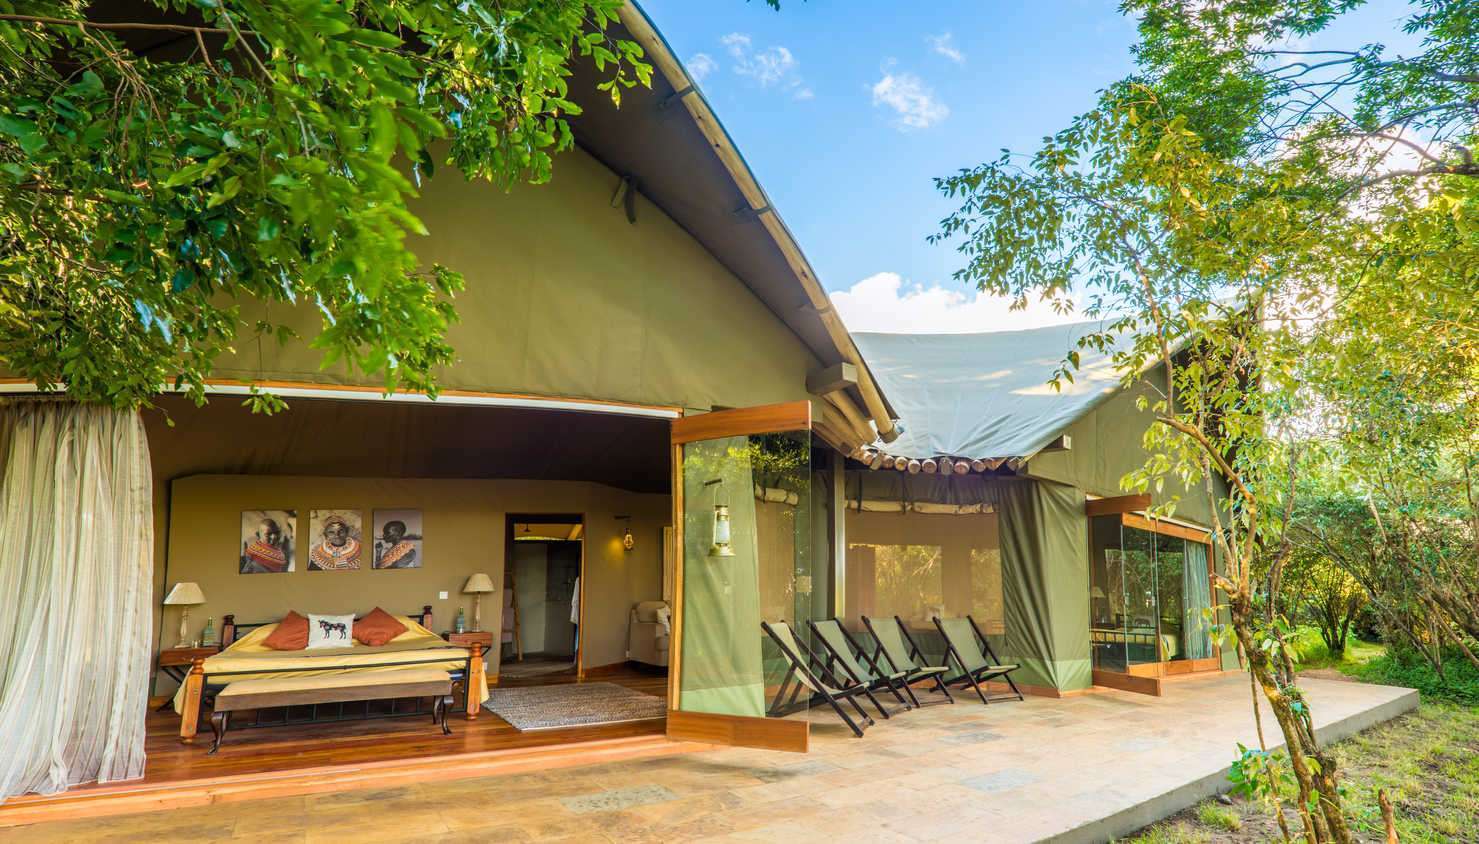 Best Camp in Mara National Reserve #6. Sala's Camp Sala's Camp is the perfect place to experience the Masai Mara in comfort and luxury. It’s a tented camp that is situated in the heart of the Reserve and provides guests with stunning views of the savanna. The camp features spacious and cozy tents that are fully-equipped with all the necessary amenities for your conformity during your safari in the Mara. These include a private pool, spa and delicious cuisine. Why You Need to Stay at Sala’s Camp - Luxury tented accommodation - Exclusive pool & spa - Delicious cuisine - Game drives and bush walks - Professional staff -Elegant dining room & outdoor terrace - Stunning savanna view - Balloon safaris available.